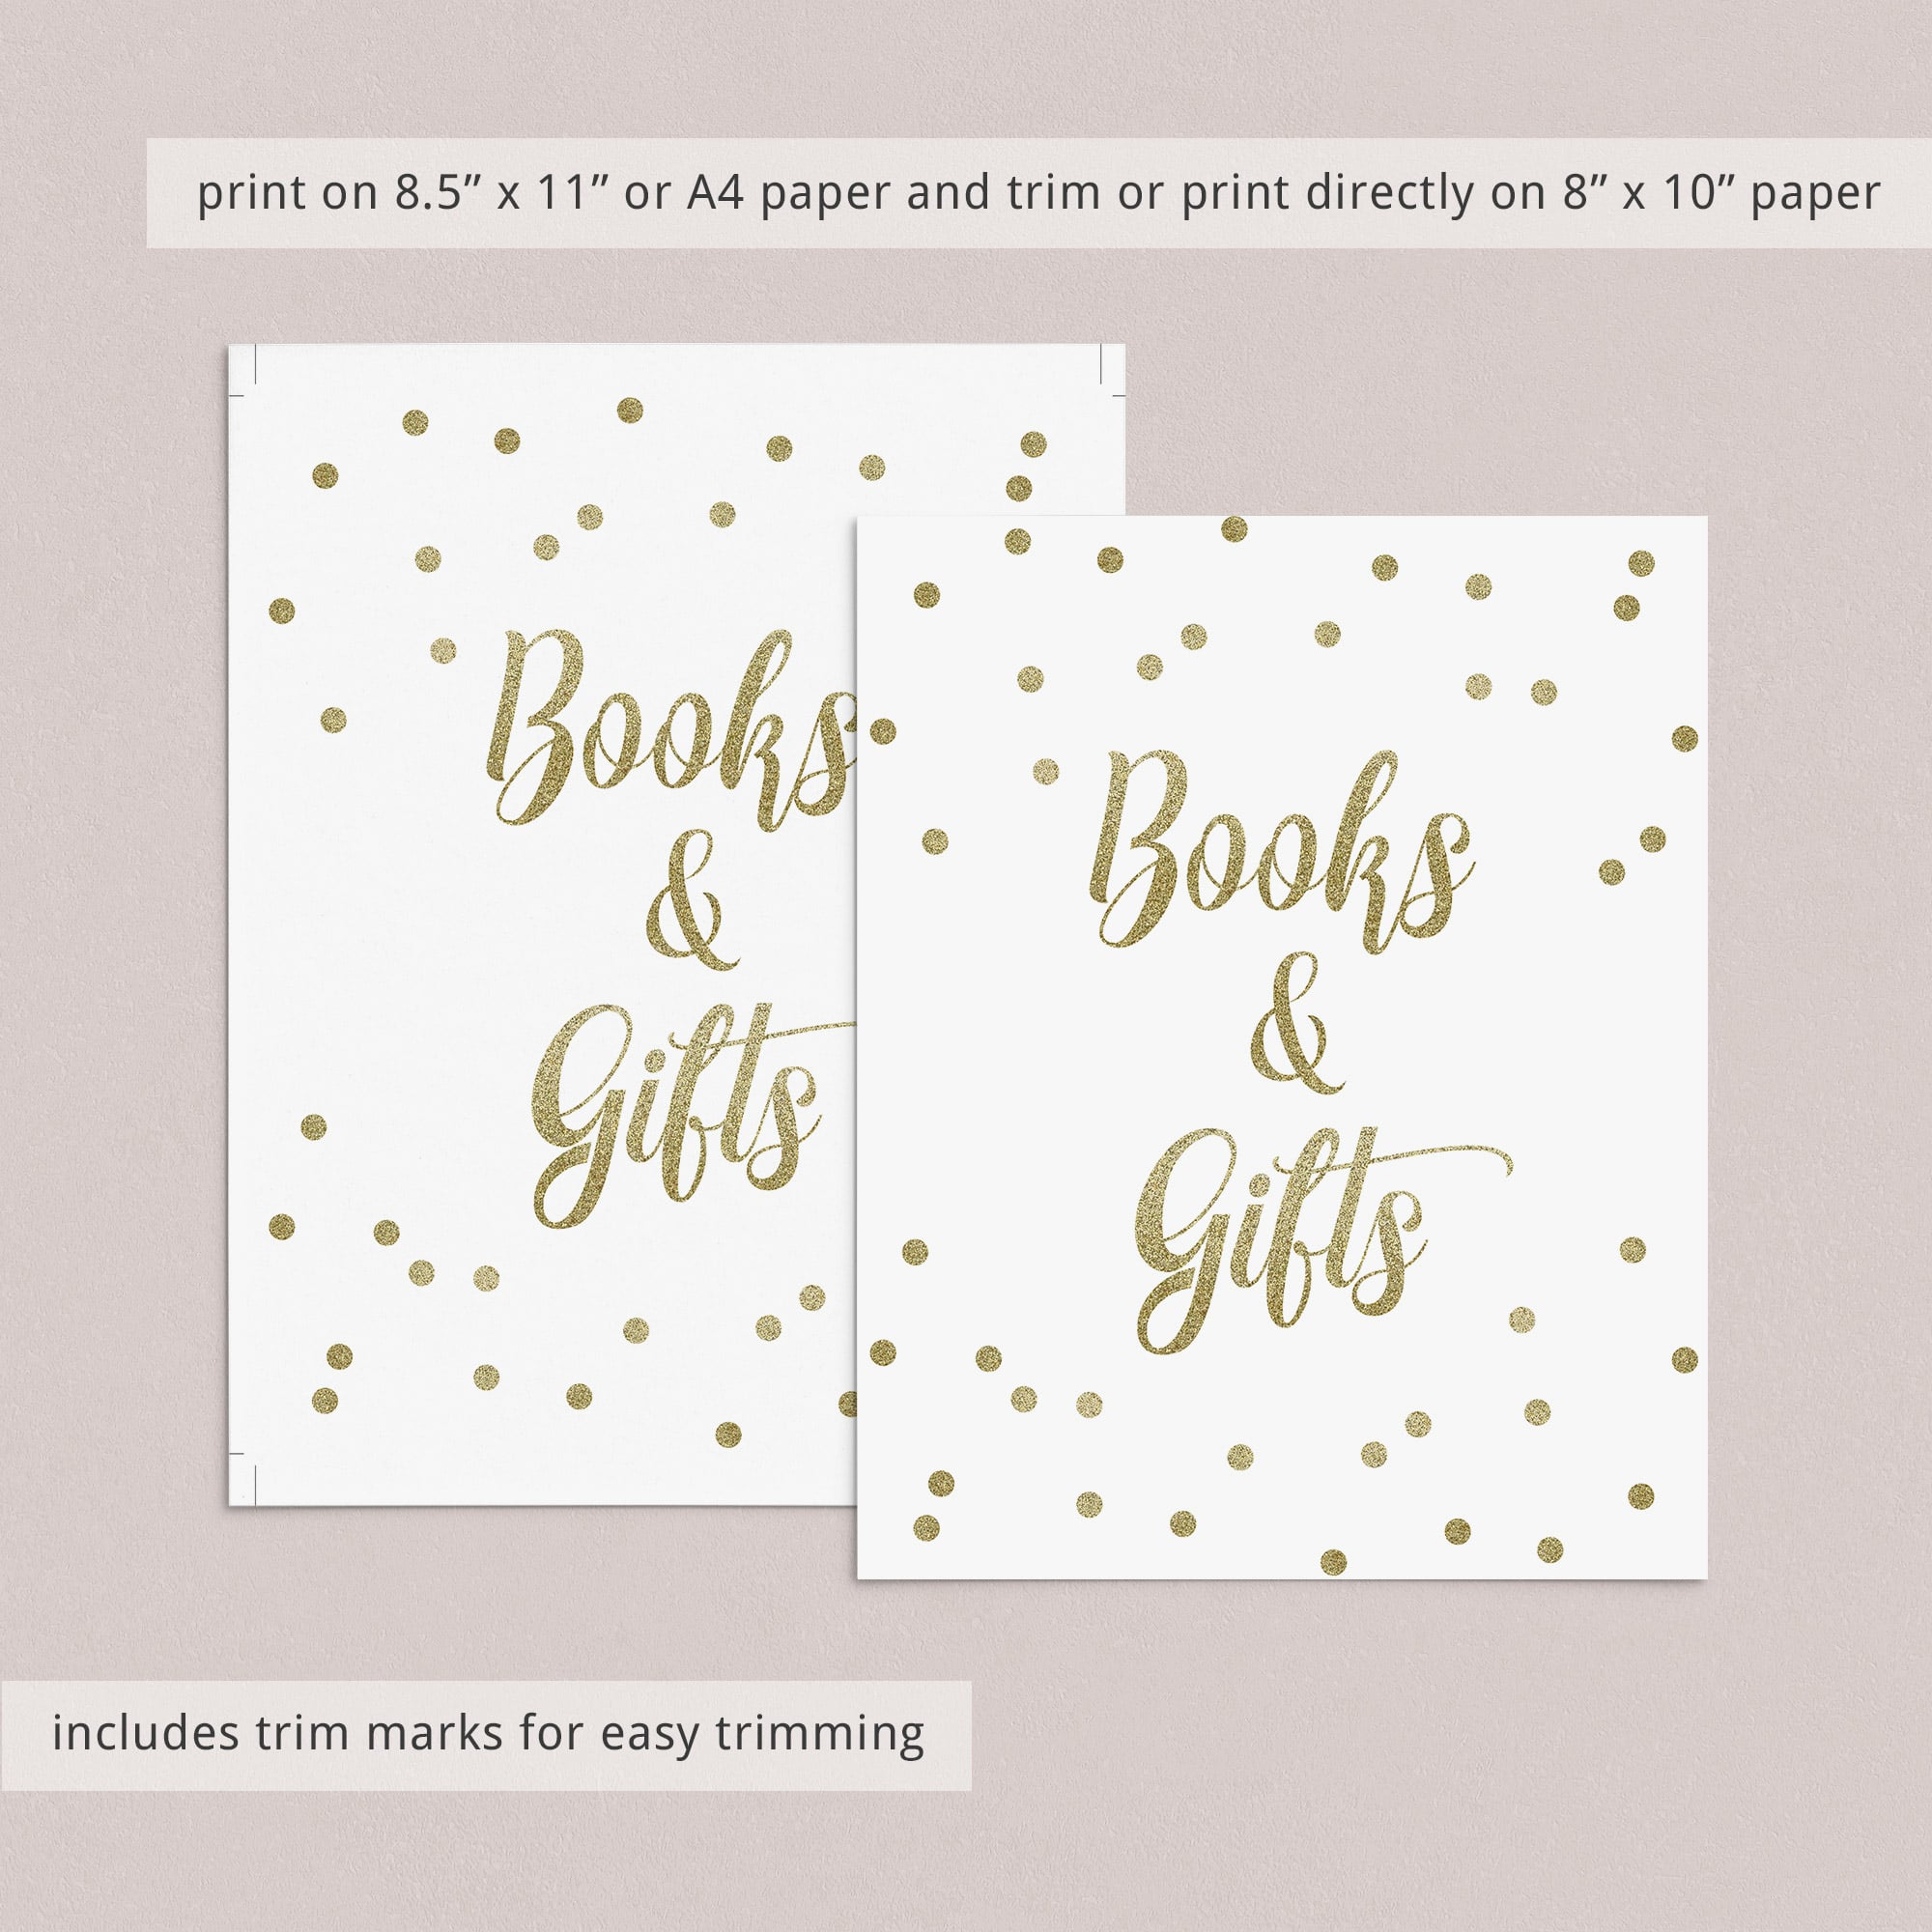 Books and gifts baby shower table sign instant download PDF by LittleSizzle